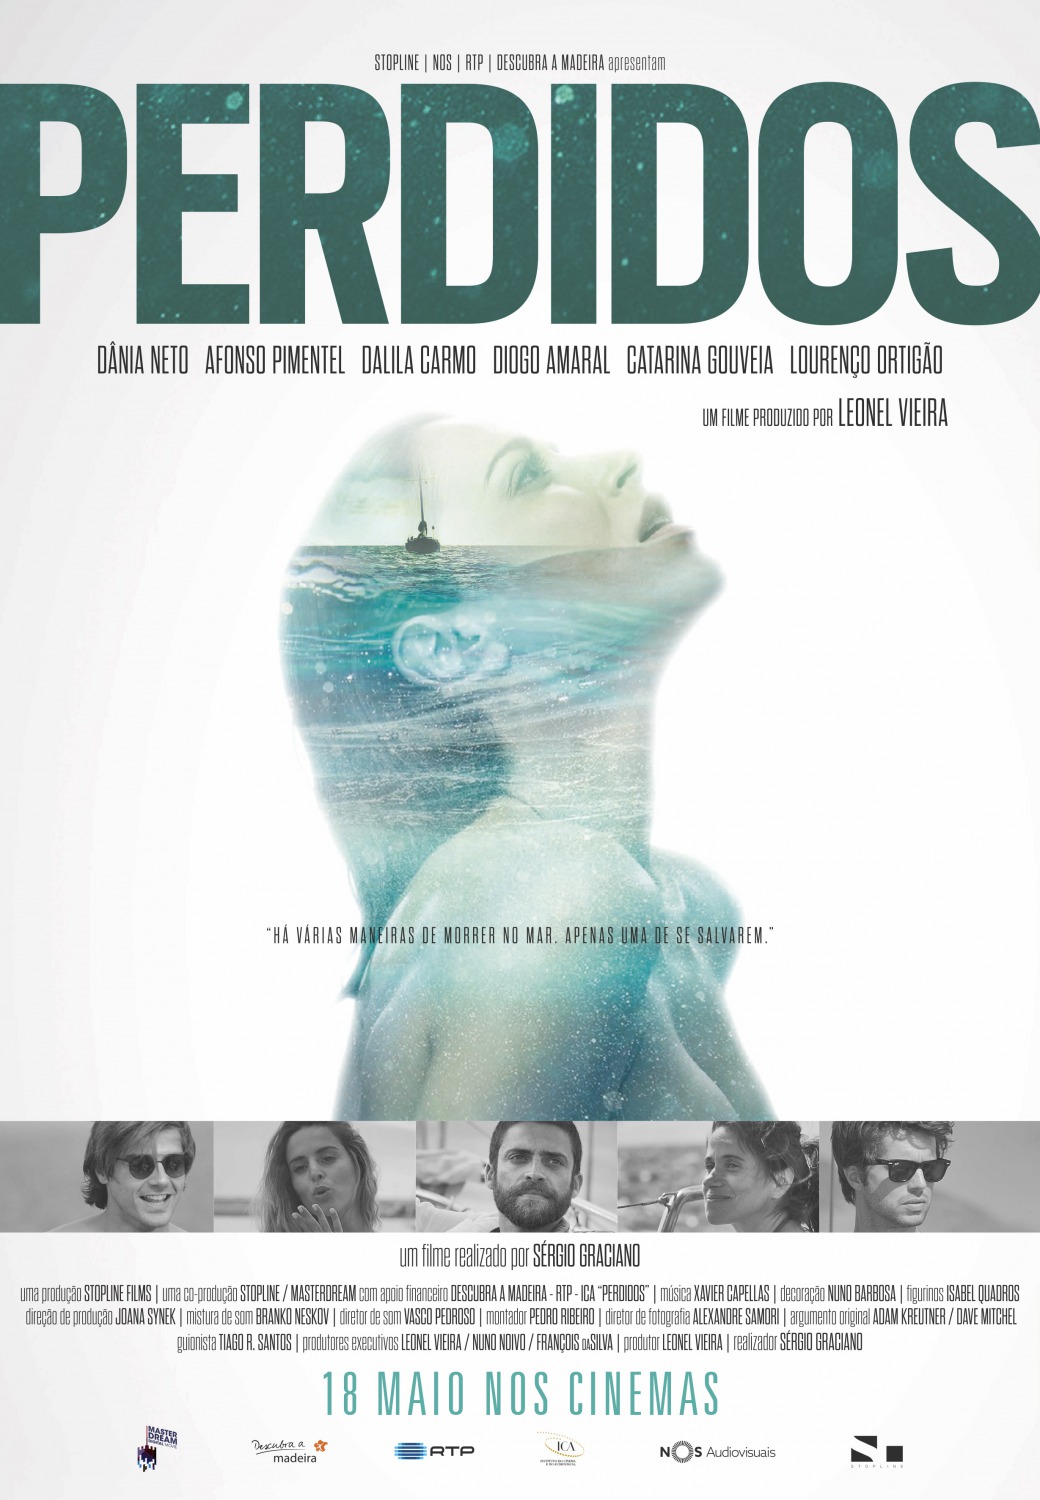 Extra Large Movie Poster Image for Perdidos 